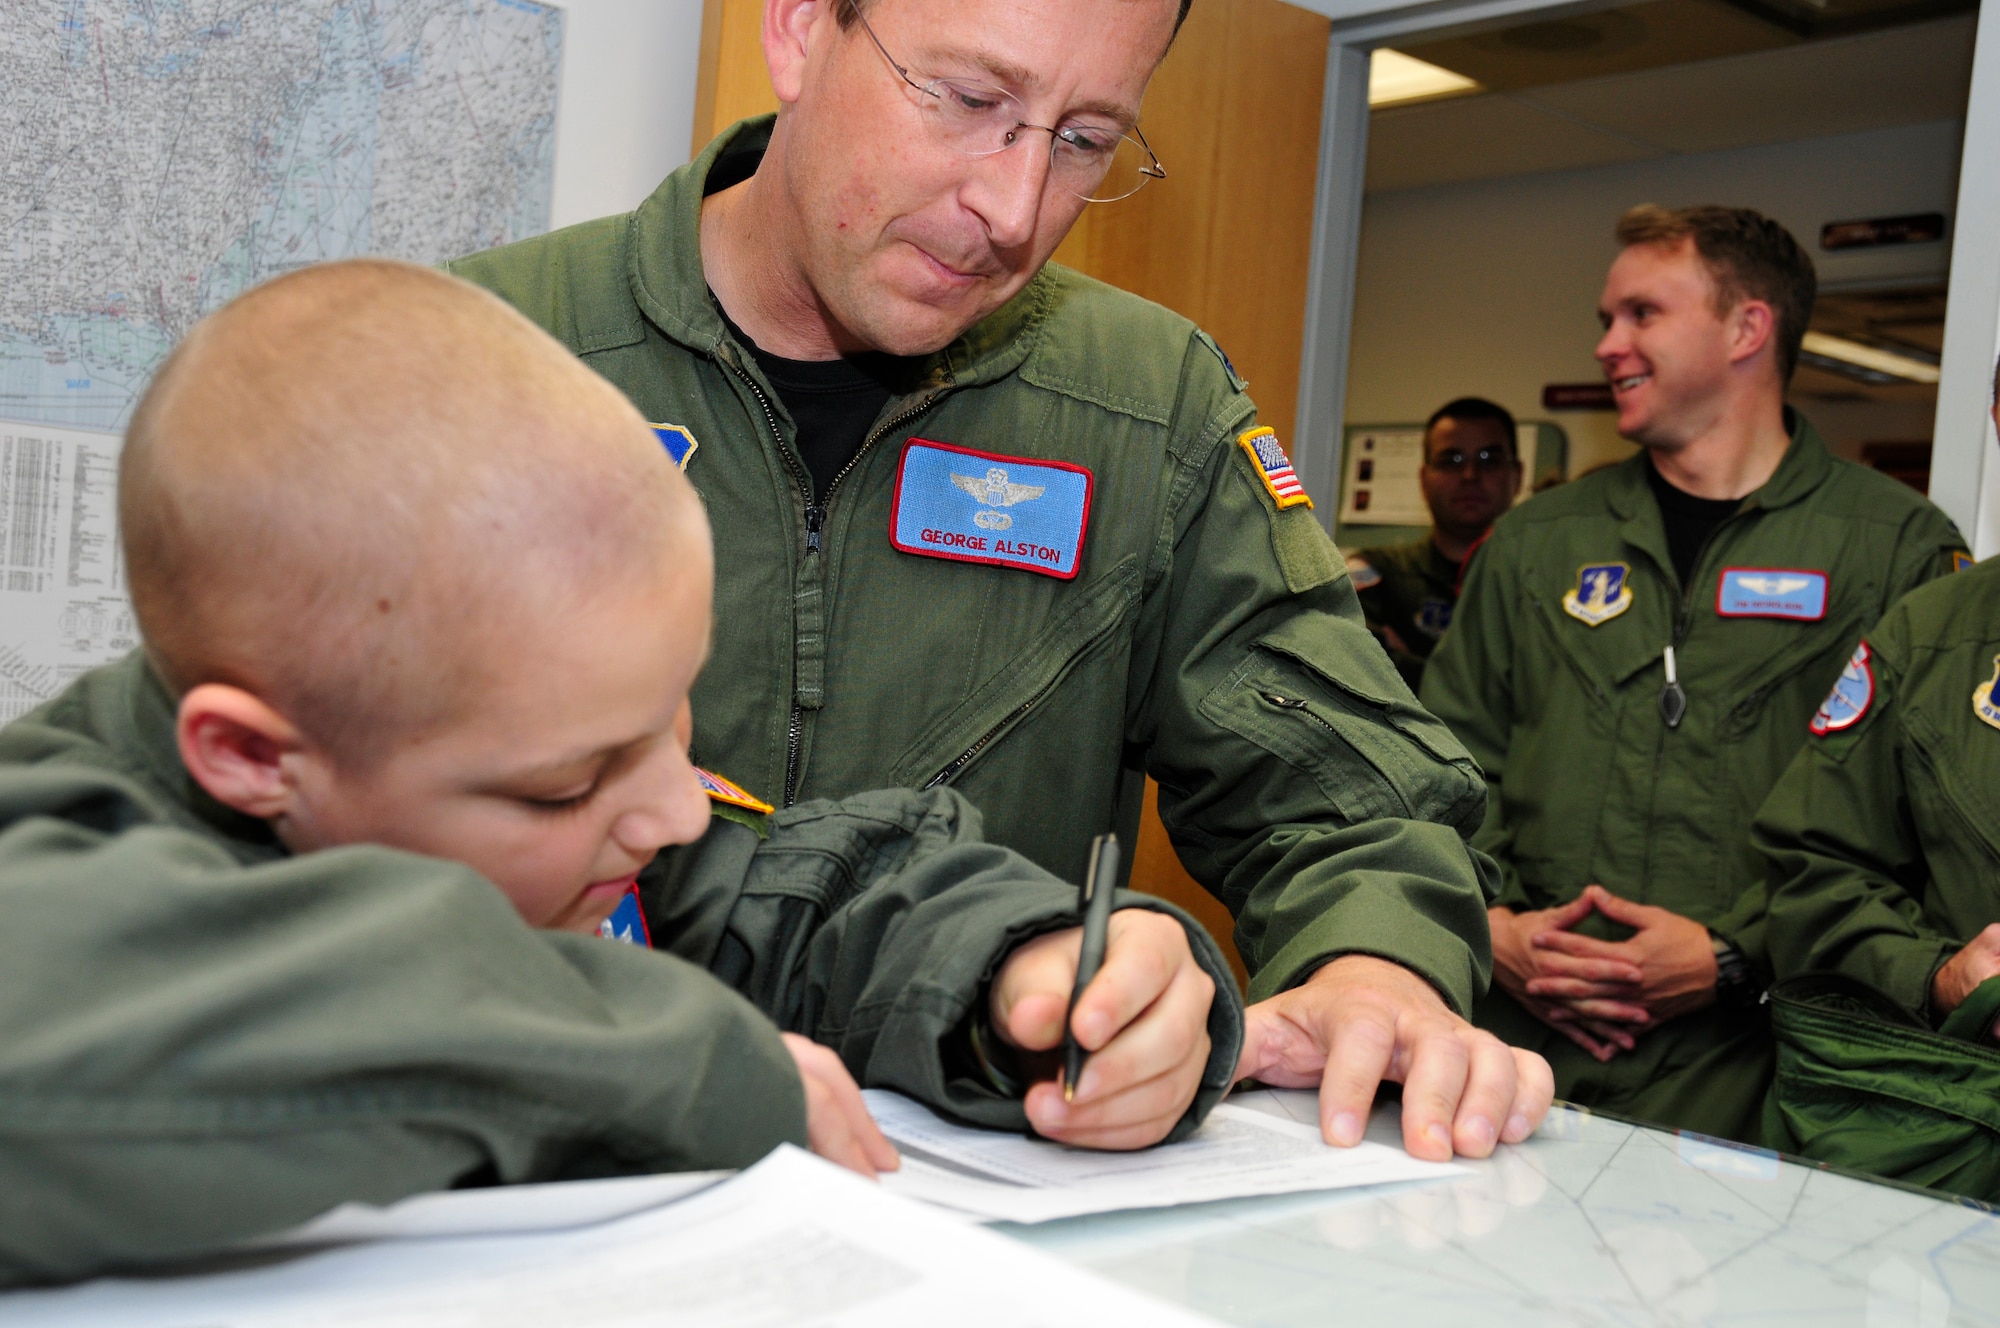 Lt. Col. George Alston oversees as Jacob Kaminski signs his orders for a mock LC-130 mission. Jacob, 9, came to the base Oct. 6 to fulfill his dream of being a soldier for a day. After spending the day with the Army, he came to the base to see what it was like to be a pilot with the 109th Airlift Wing. Jacob has been diagnosed with leukemia. (U.S. Air Force photo by Master Sgt. Willie Gizara)